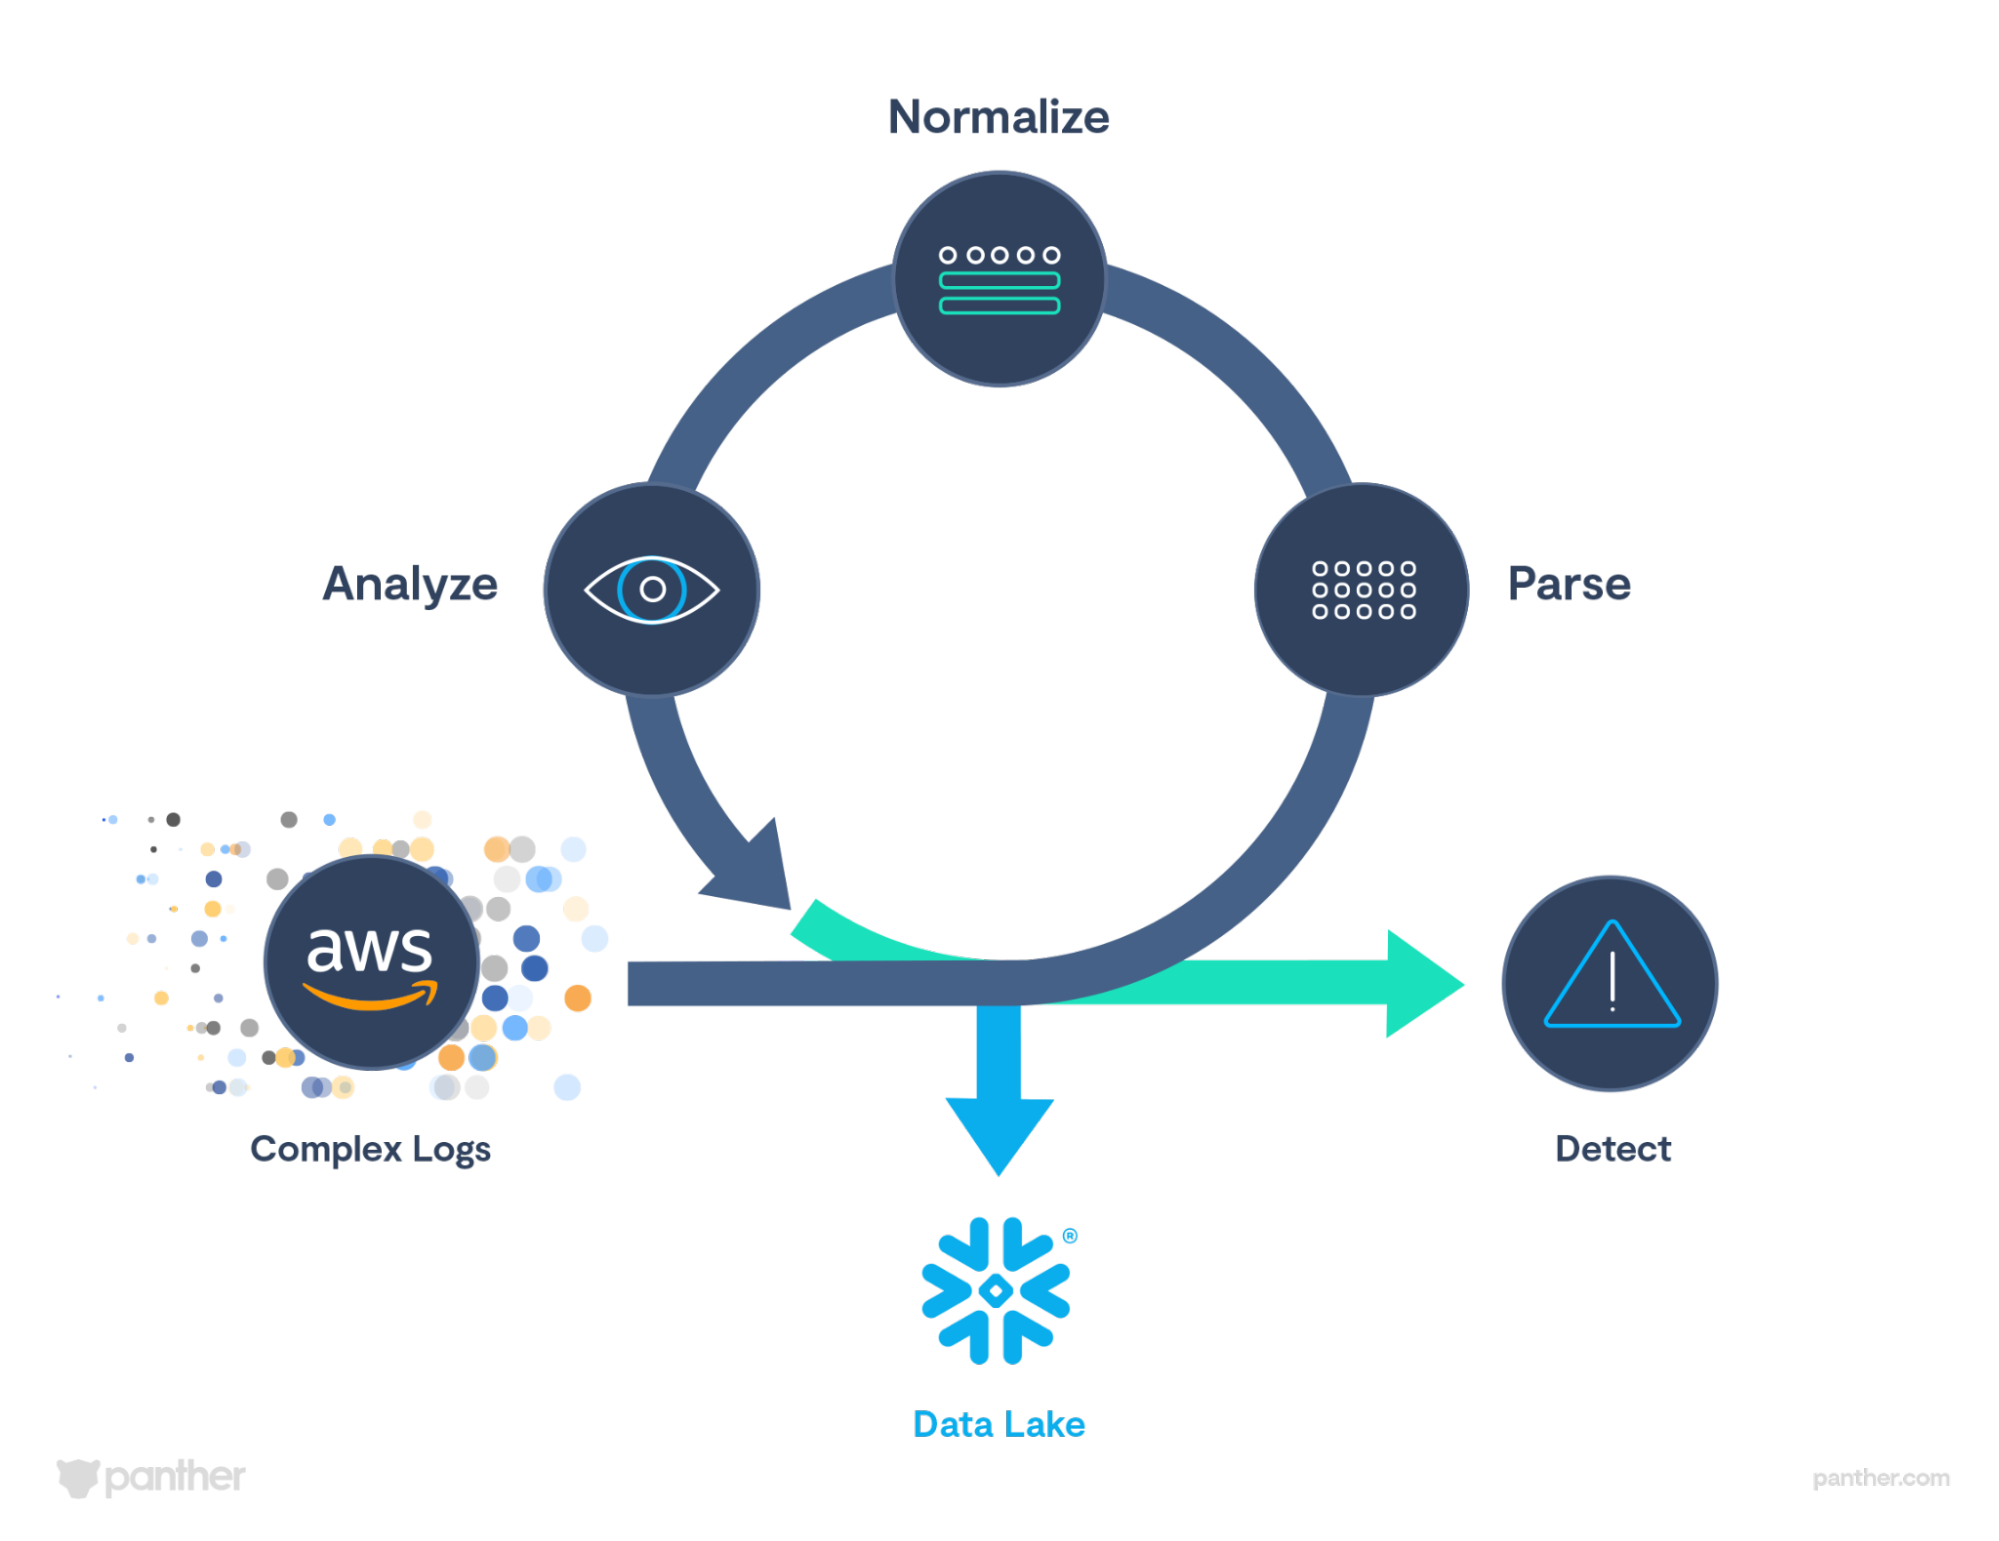 Diagram showing complex AWS logs being parsed, normalized, analyzed and simultaneously being ran through detections in addition to being stored in the data lake